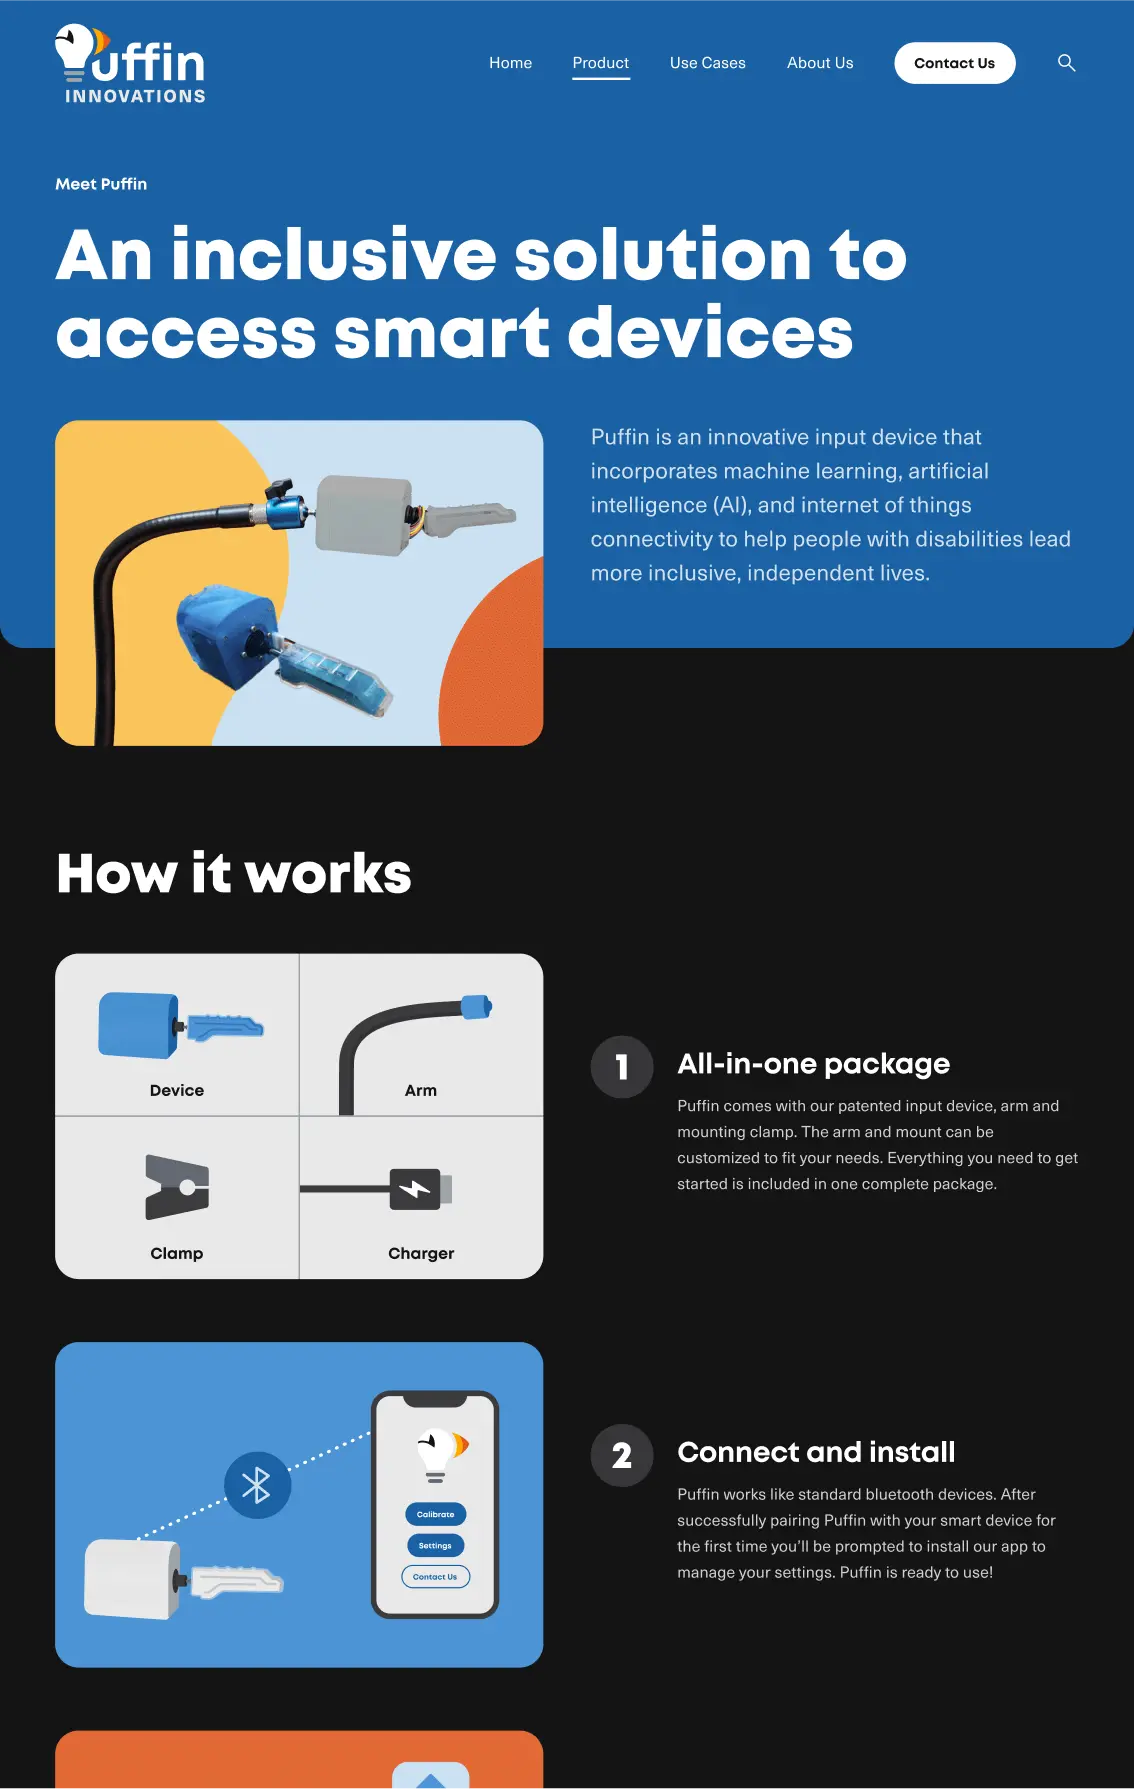 Top of desktop product page. First section is blue and titled 'An inclusive solution to access smart devices' in large white black text with cutout graphic of Puffin input device and smaller text below. Second section is black and titled 'How it works' with rows of illustrated product images and text representing first two steps - 'All-in-one package' and 'Connect and install.'